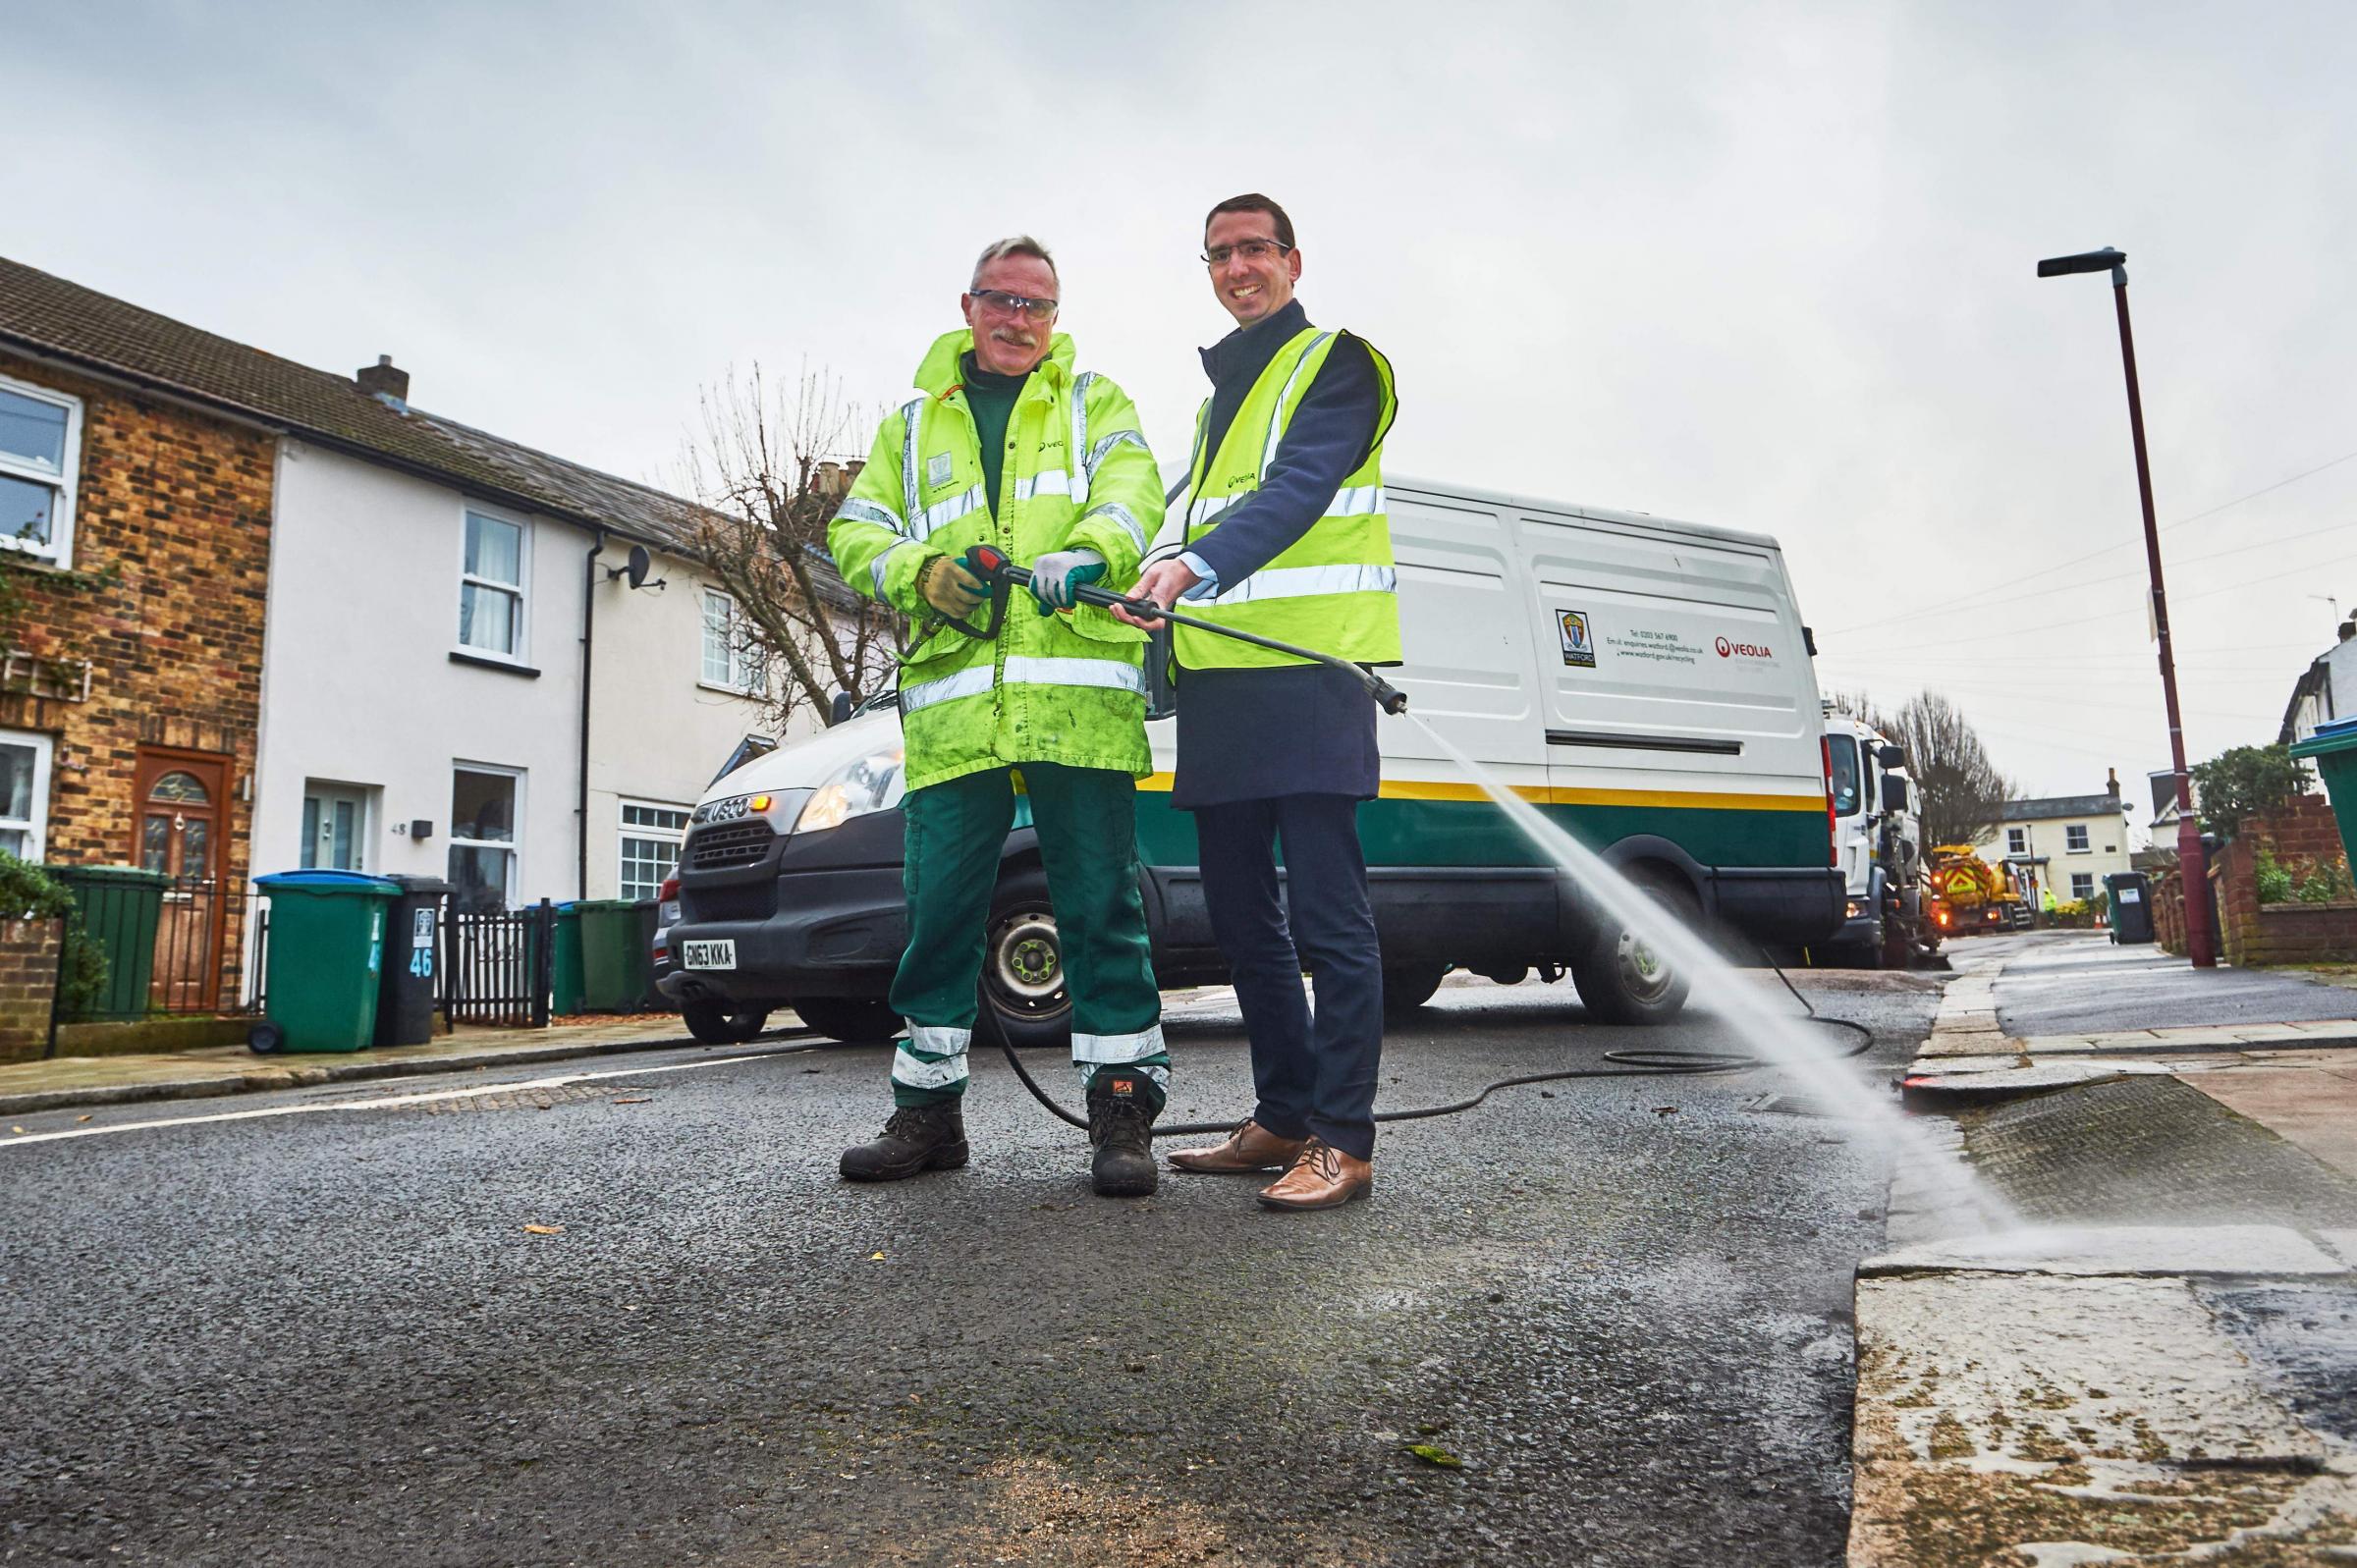 Streets spick and span after ‘Deep Clean’